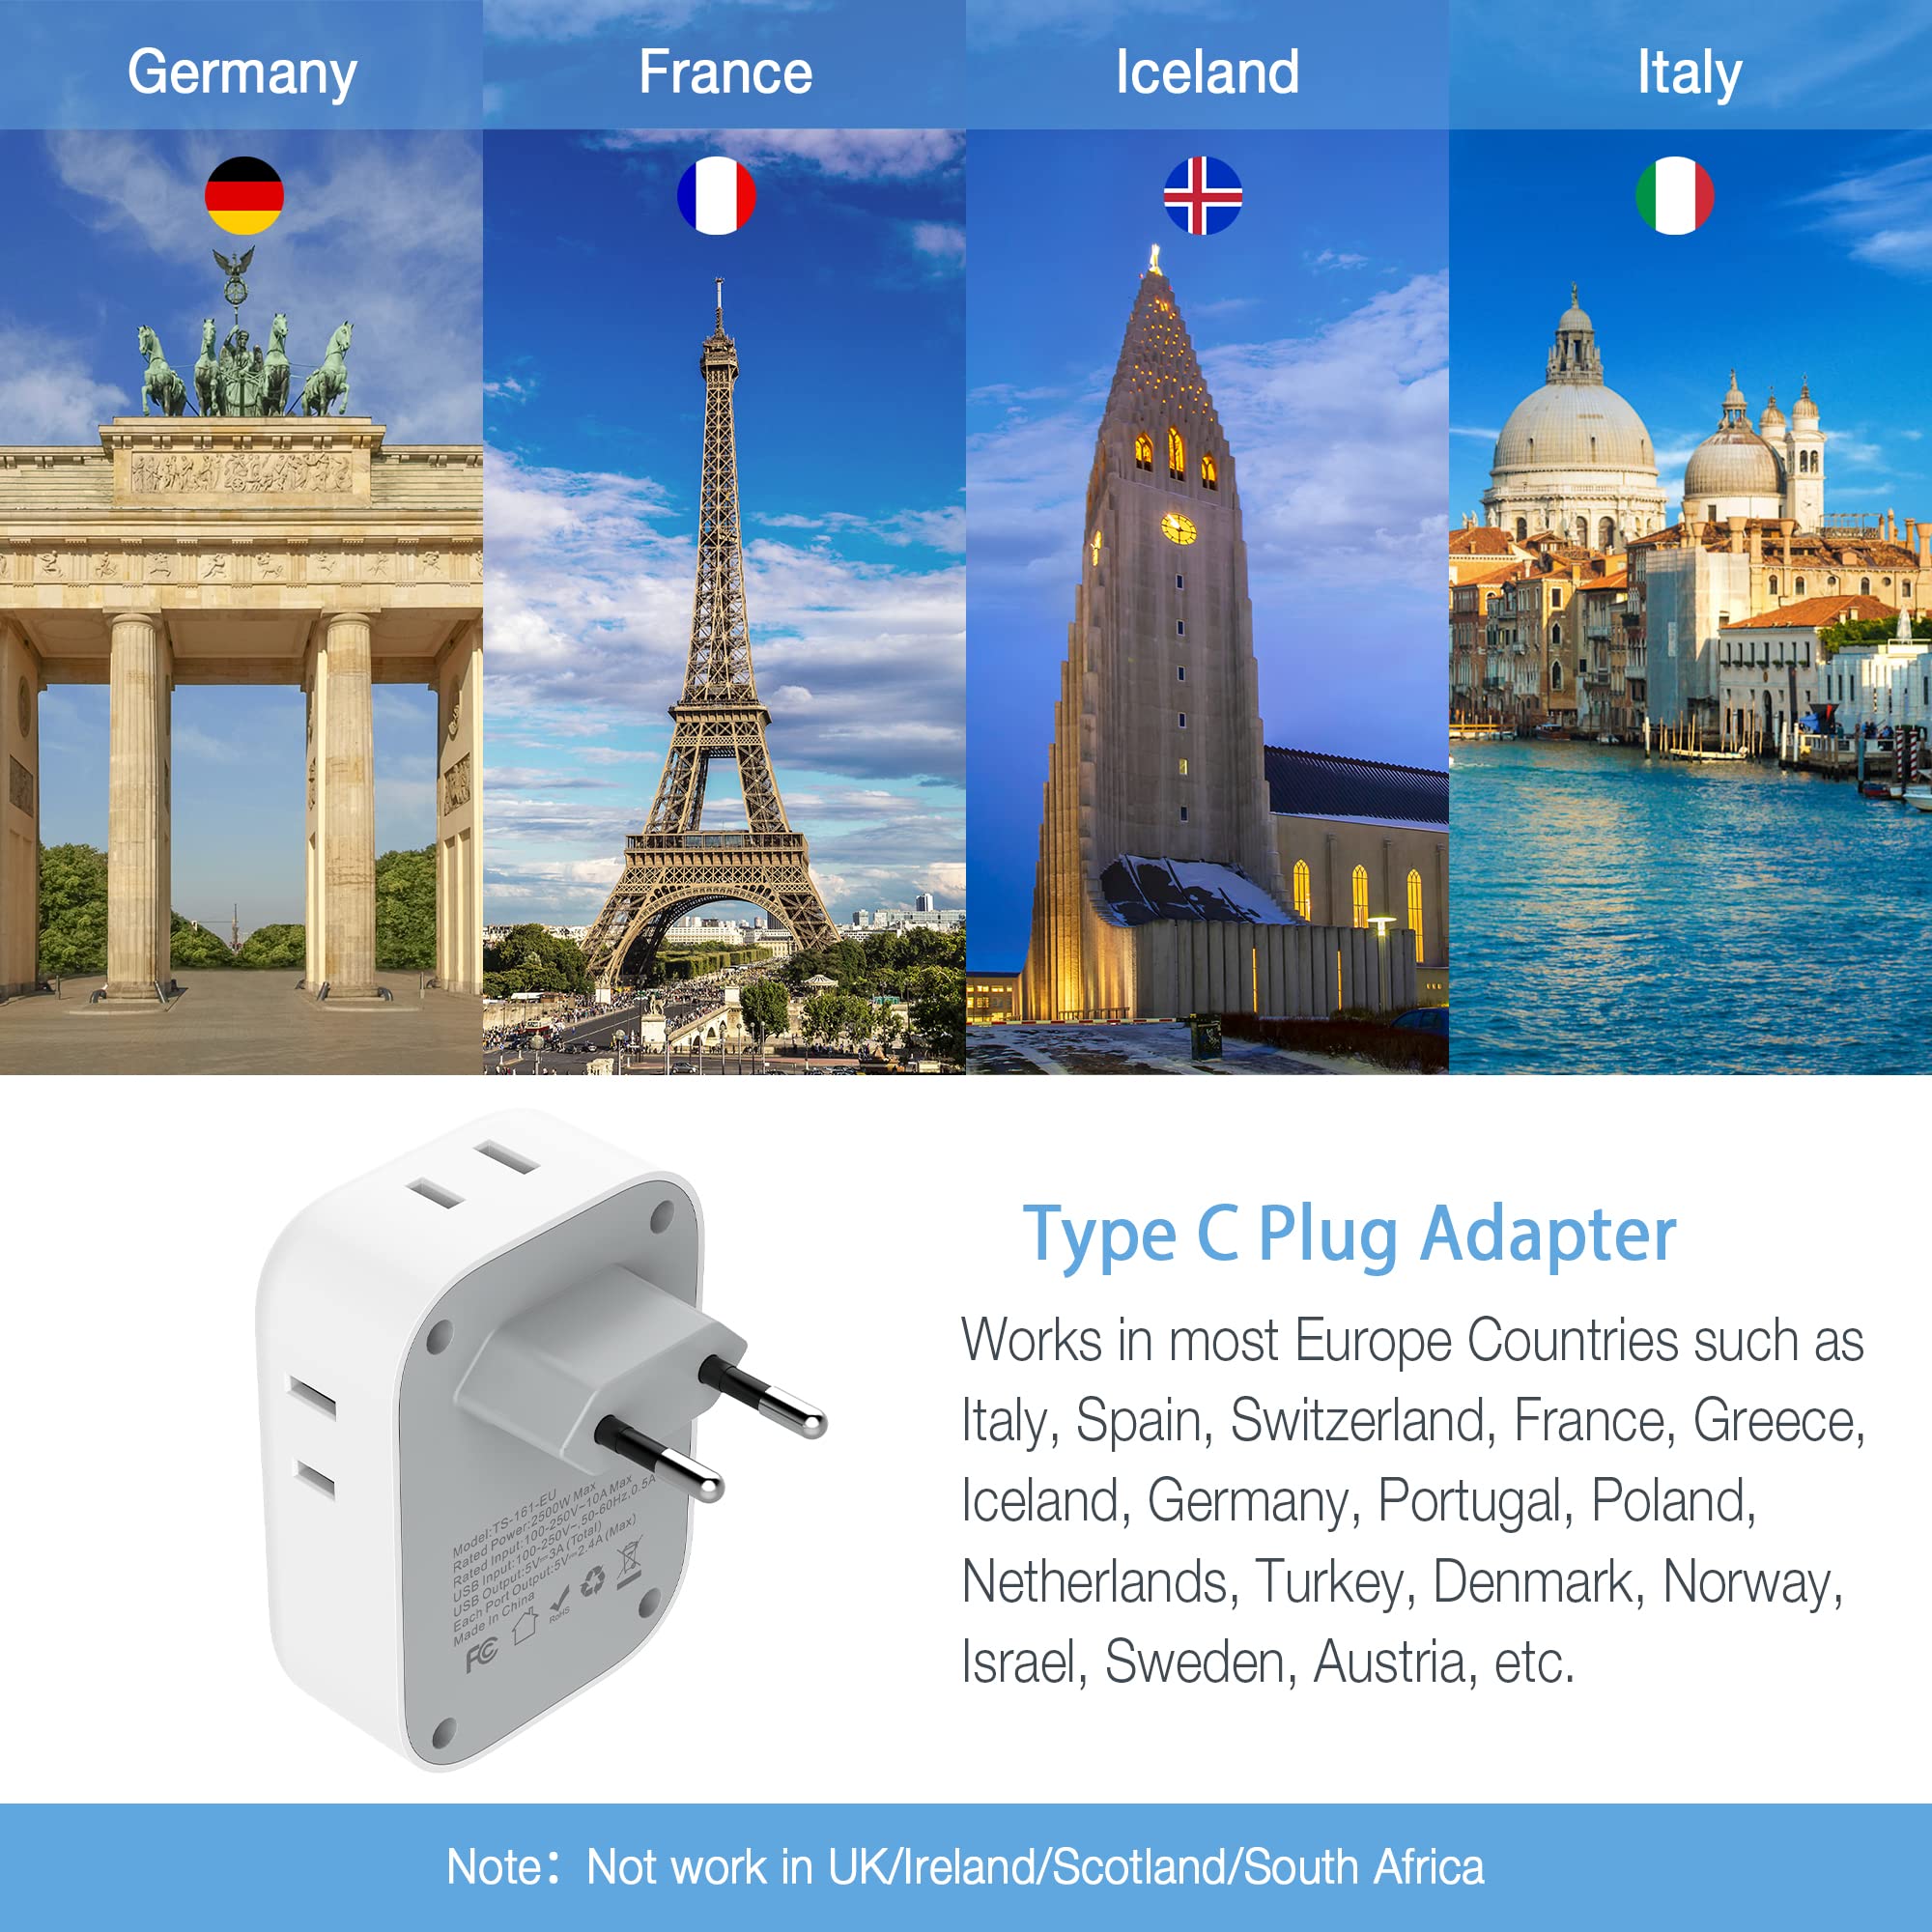 TESSAN European Travel Plug Adapter, International Power Plug with 4 AC Outlets 3 USB Ports, US to Most of Europe Euro EU Italy Spain France Iceland Germany Greece Portugal Charger Adaptor, Type C